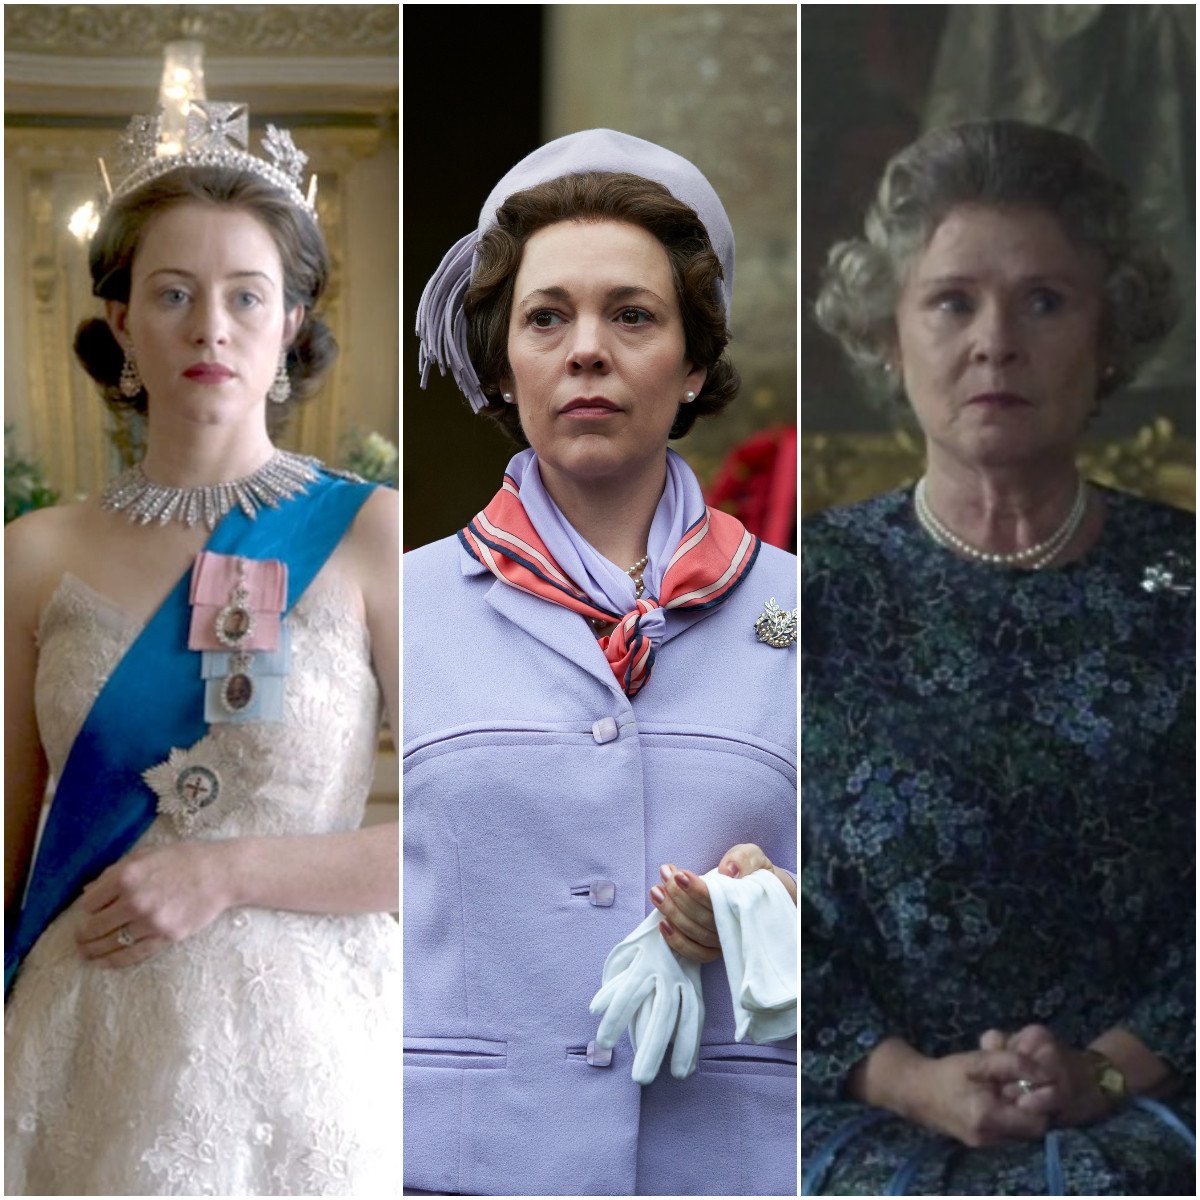 Queen Elizabeth has been played by Claire Foy, Olivia Colman and Imelda Staunton in Netflix’s The Crown. Photos: Netflix, Handout